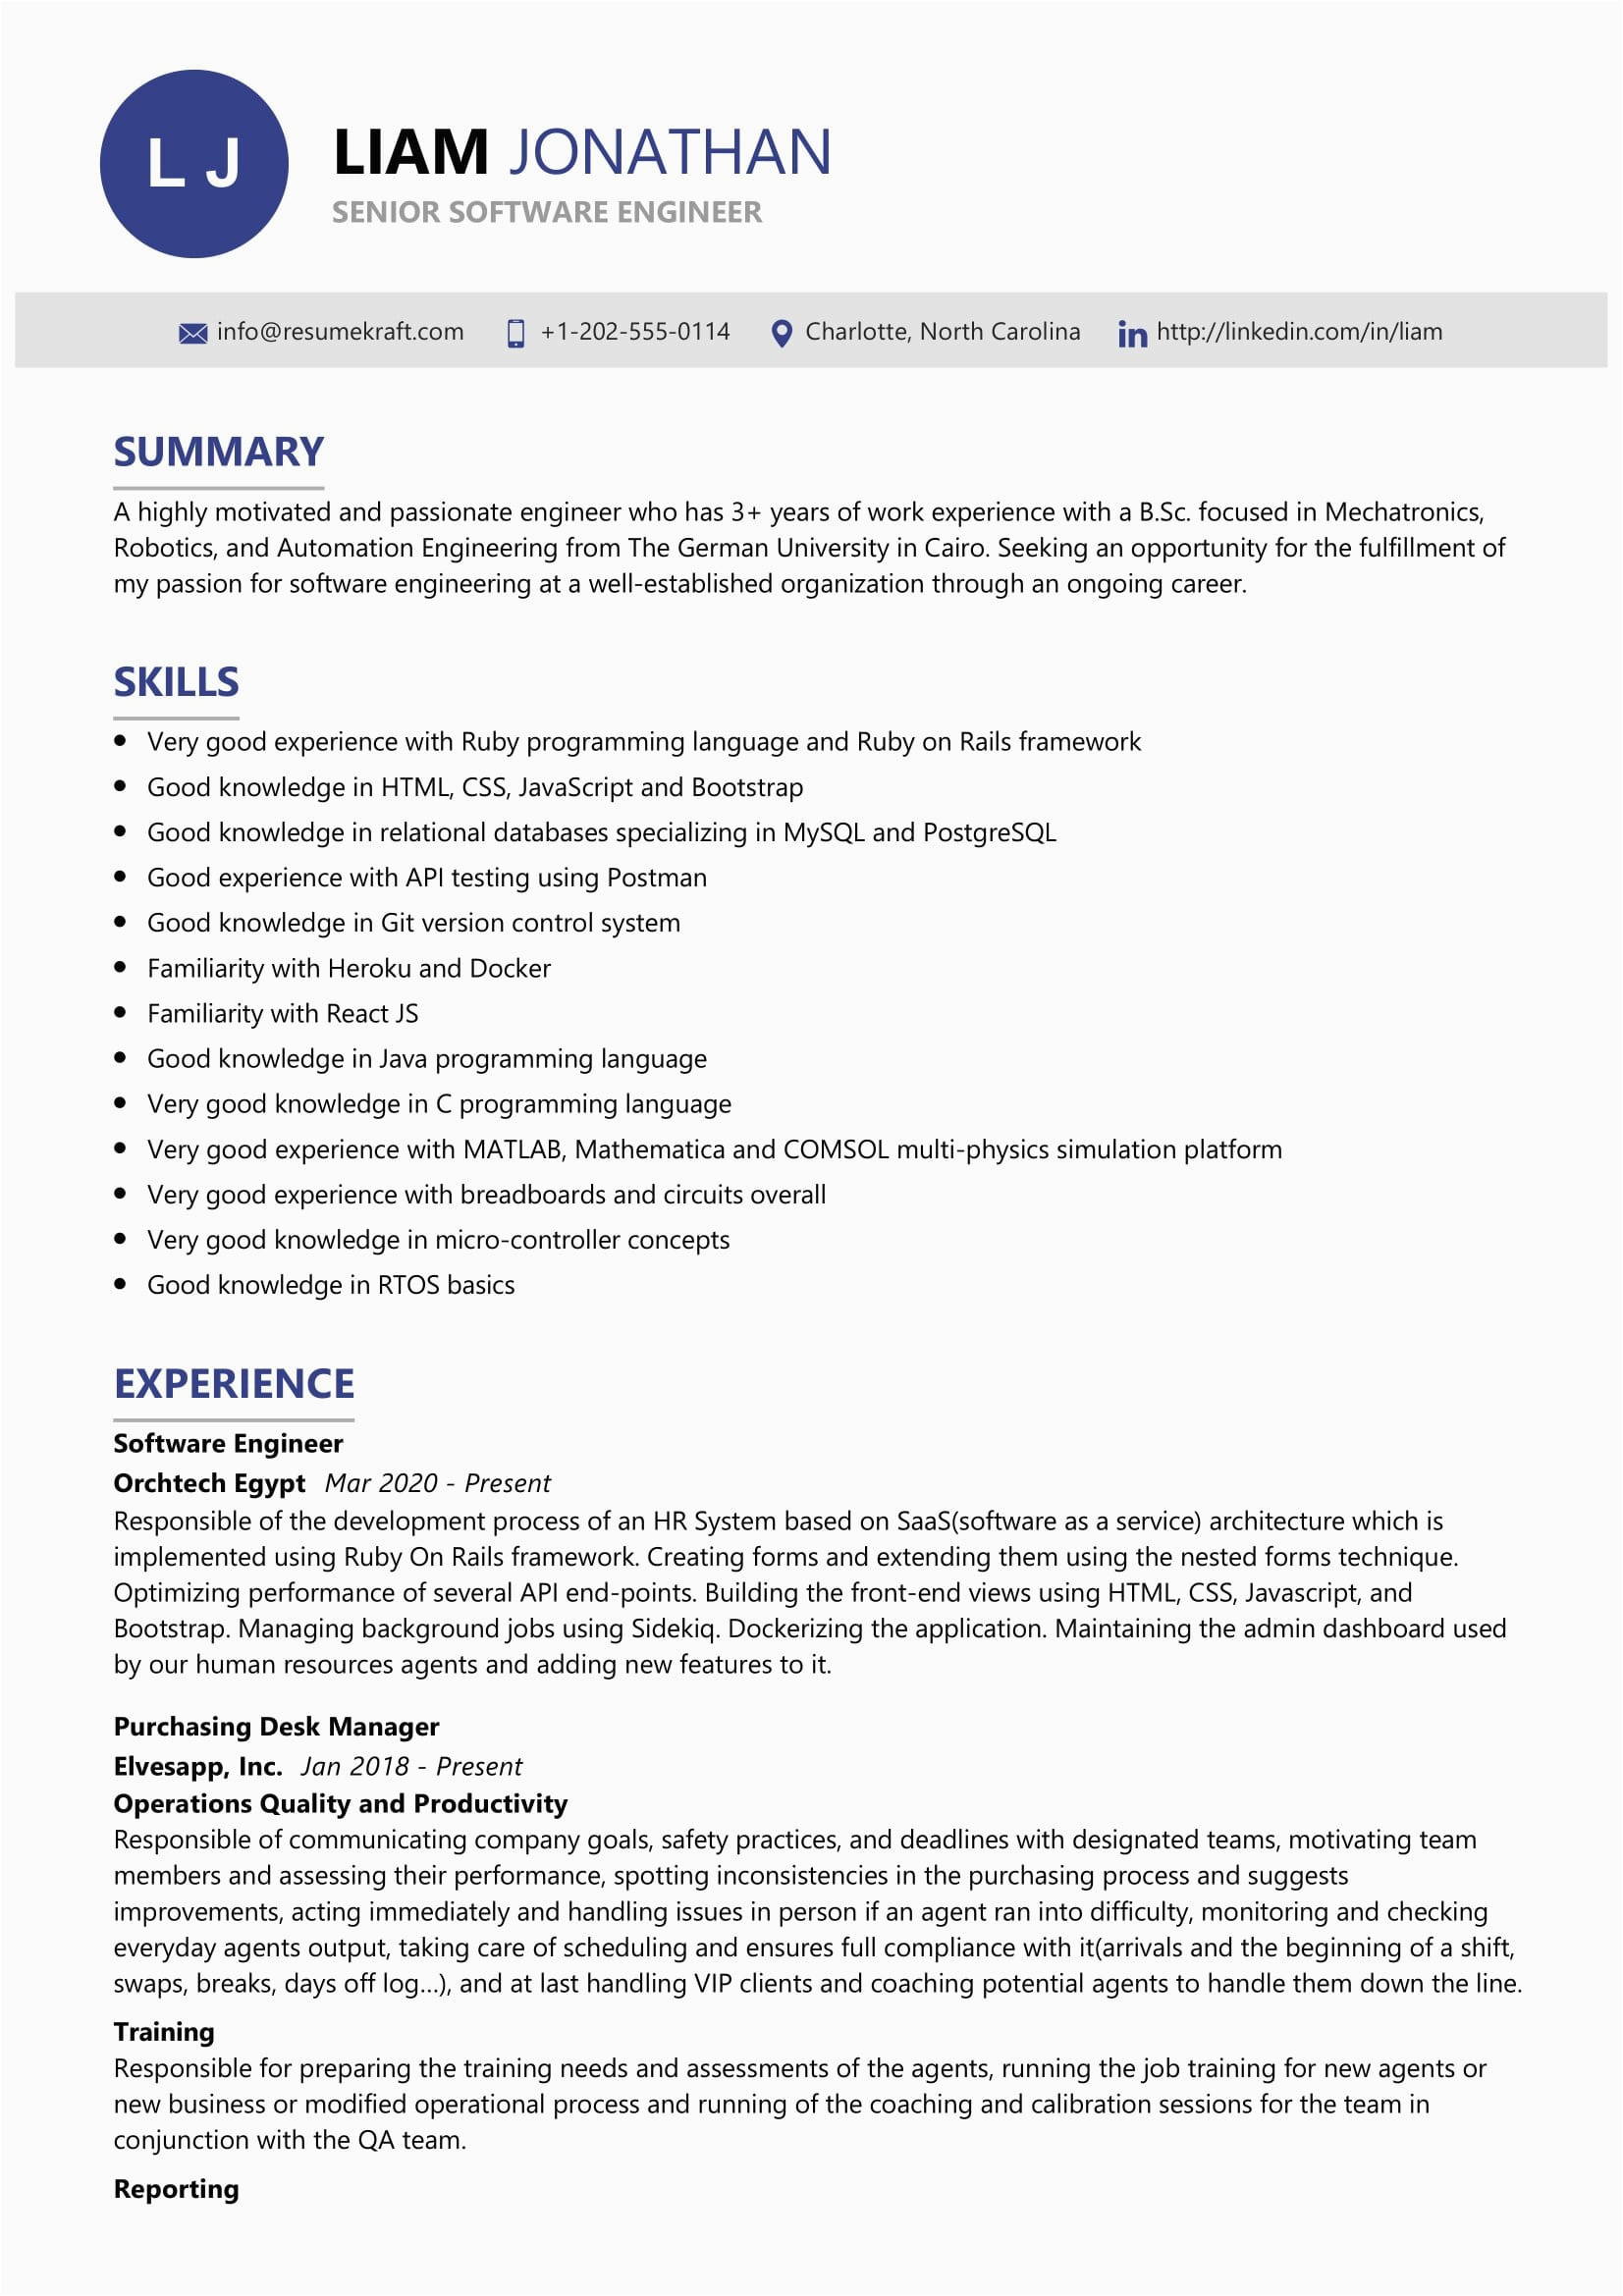 Sample Resume for Experienced software Engineer Senior software Engineer Resume Sample Resumekraft